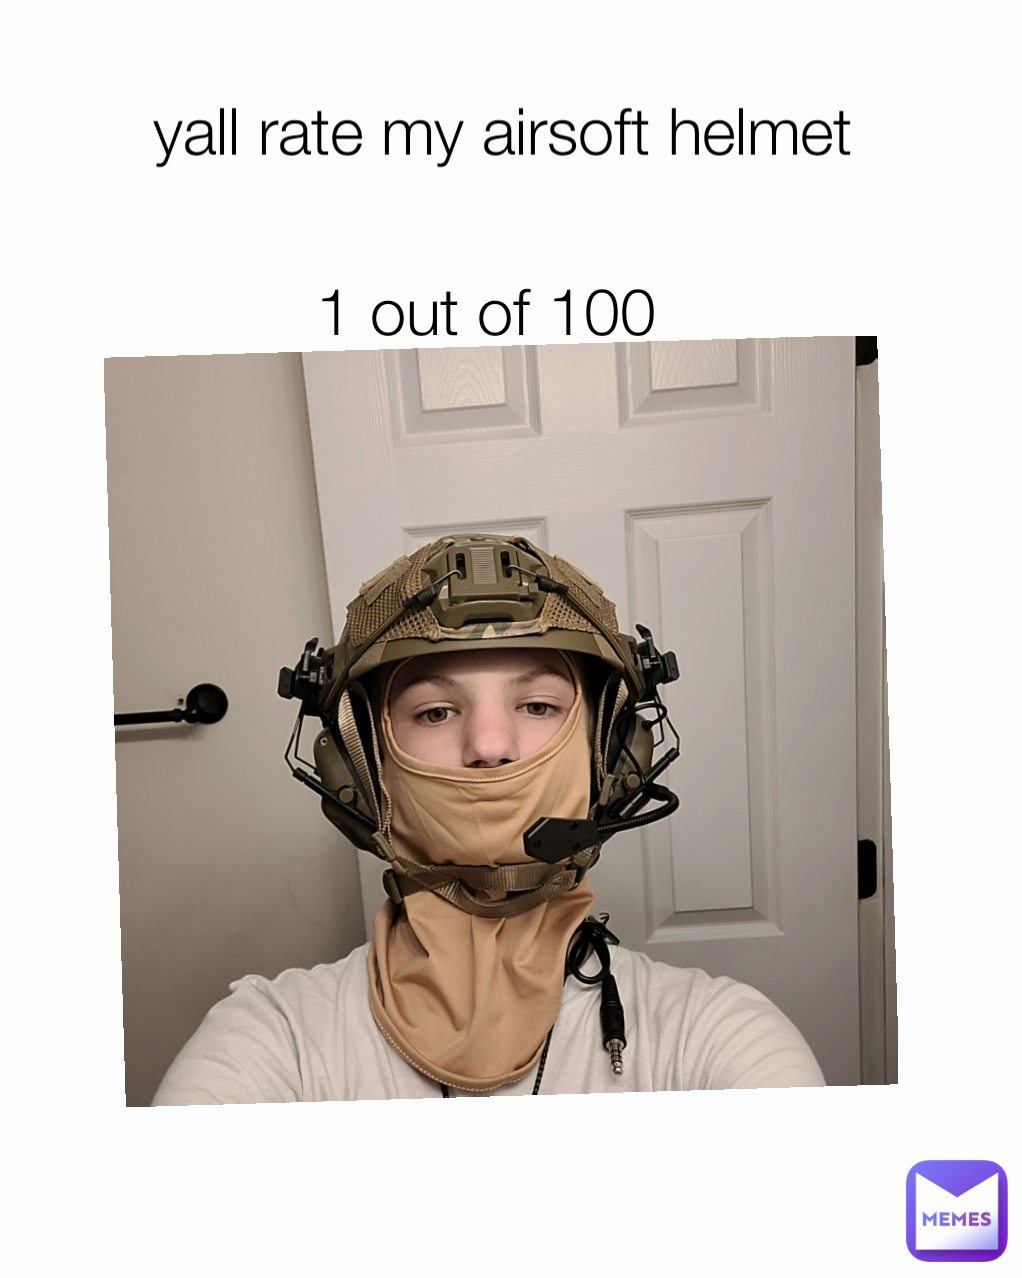 yall rate my airsoft helmet  1 out of 100